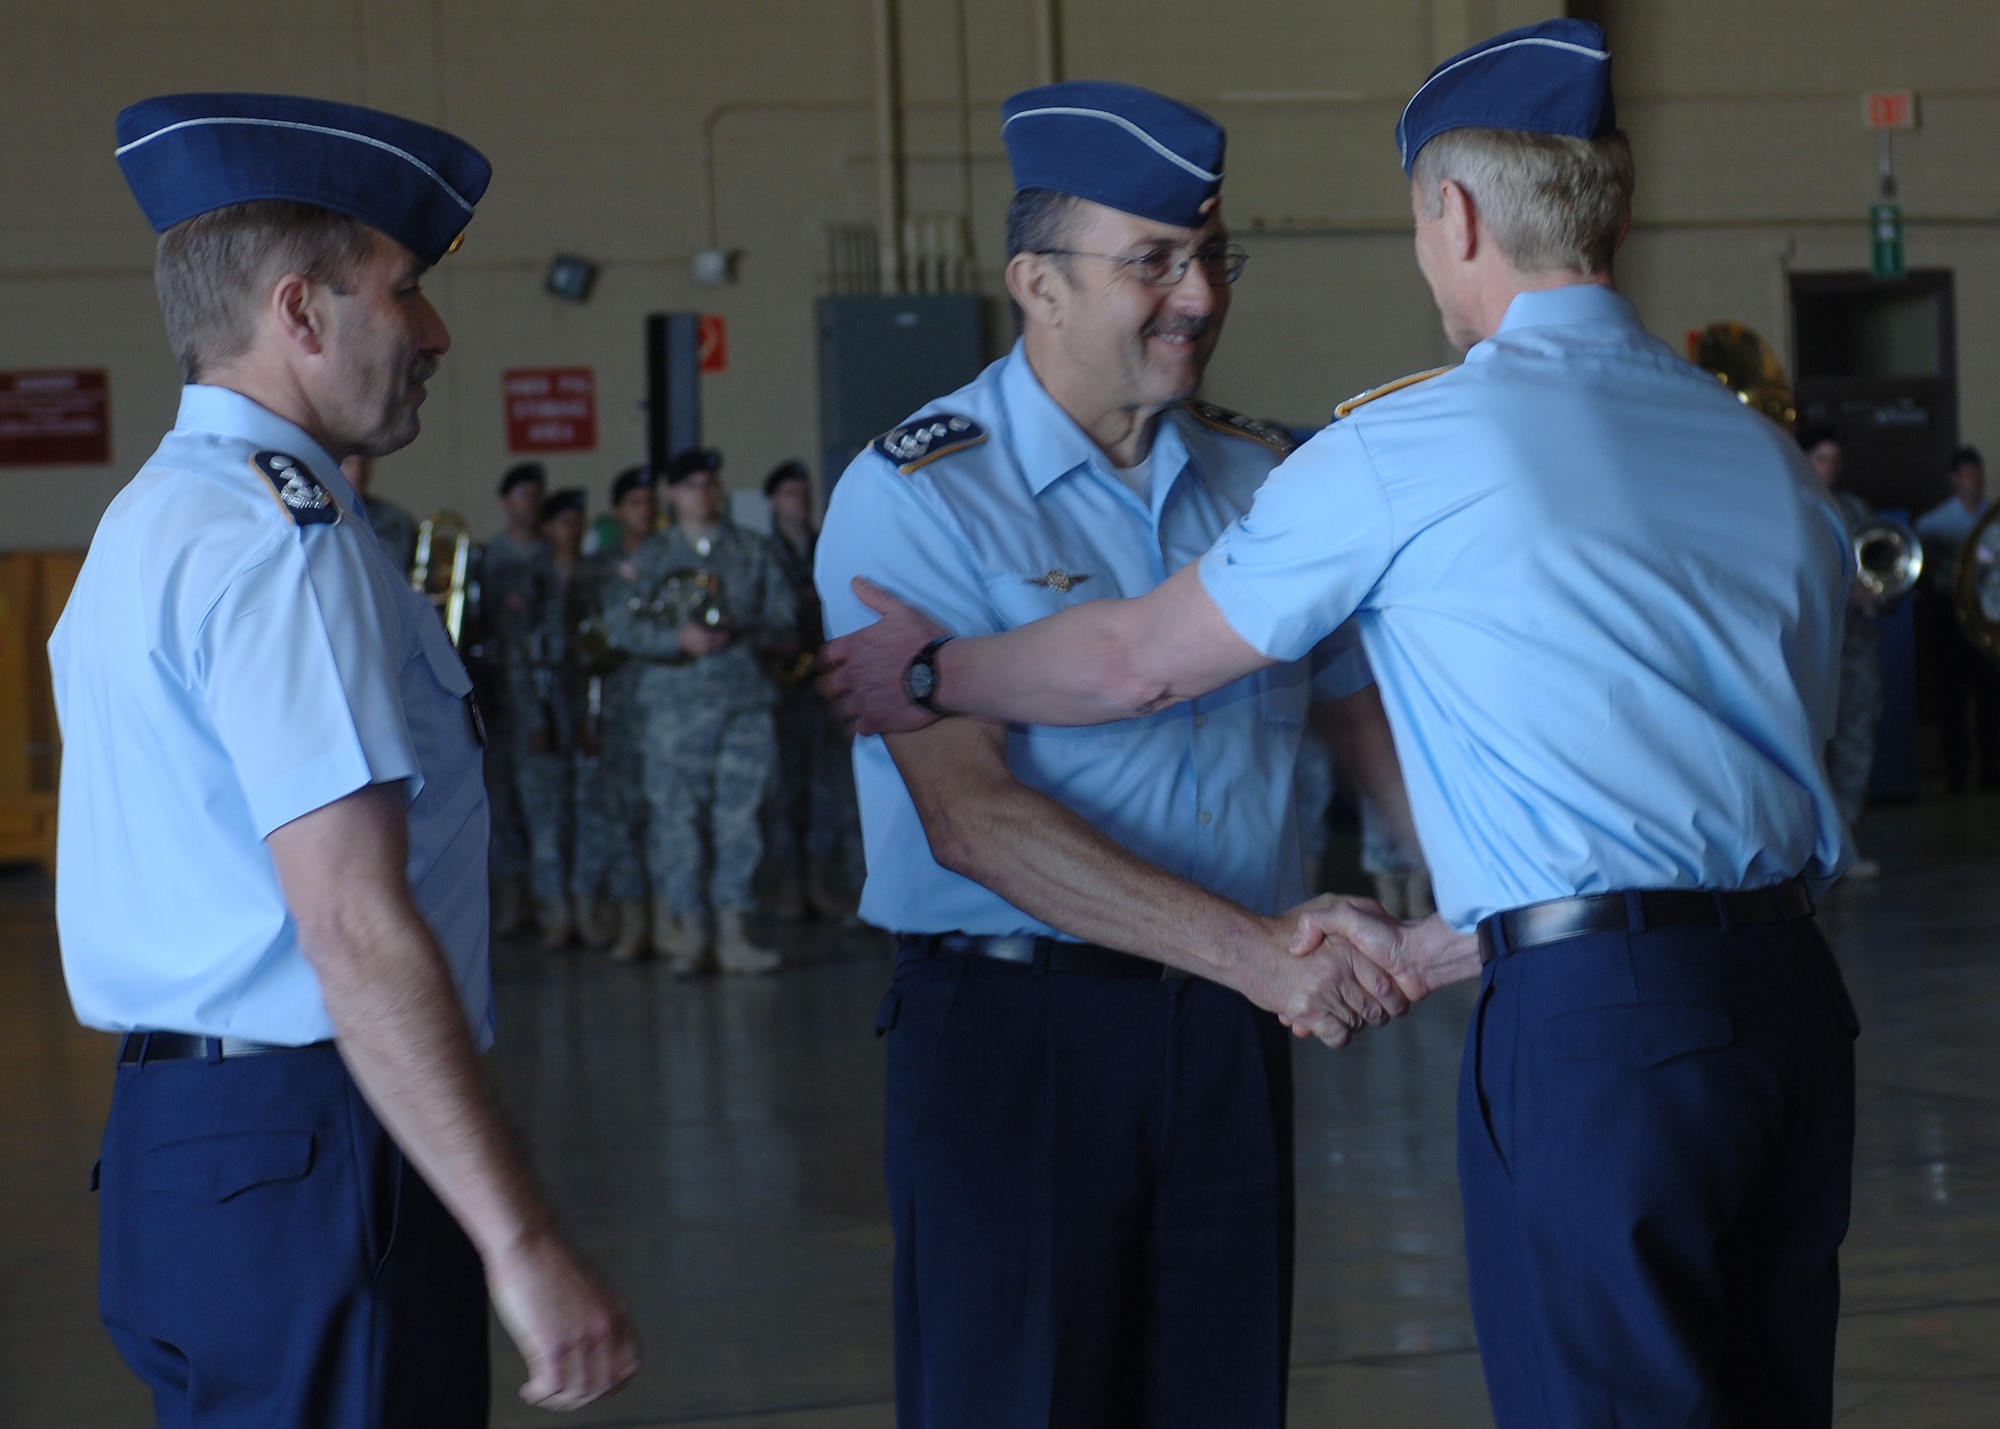 Col. Heinz Joachim Hecht, German air force U.S./Canada commander, looks on as Col. Peter Klement, German air force commander, greets former German Air Force Commander Manfred Molitor after the change of command ceremony.